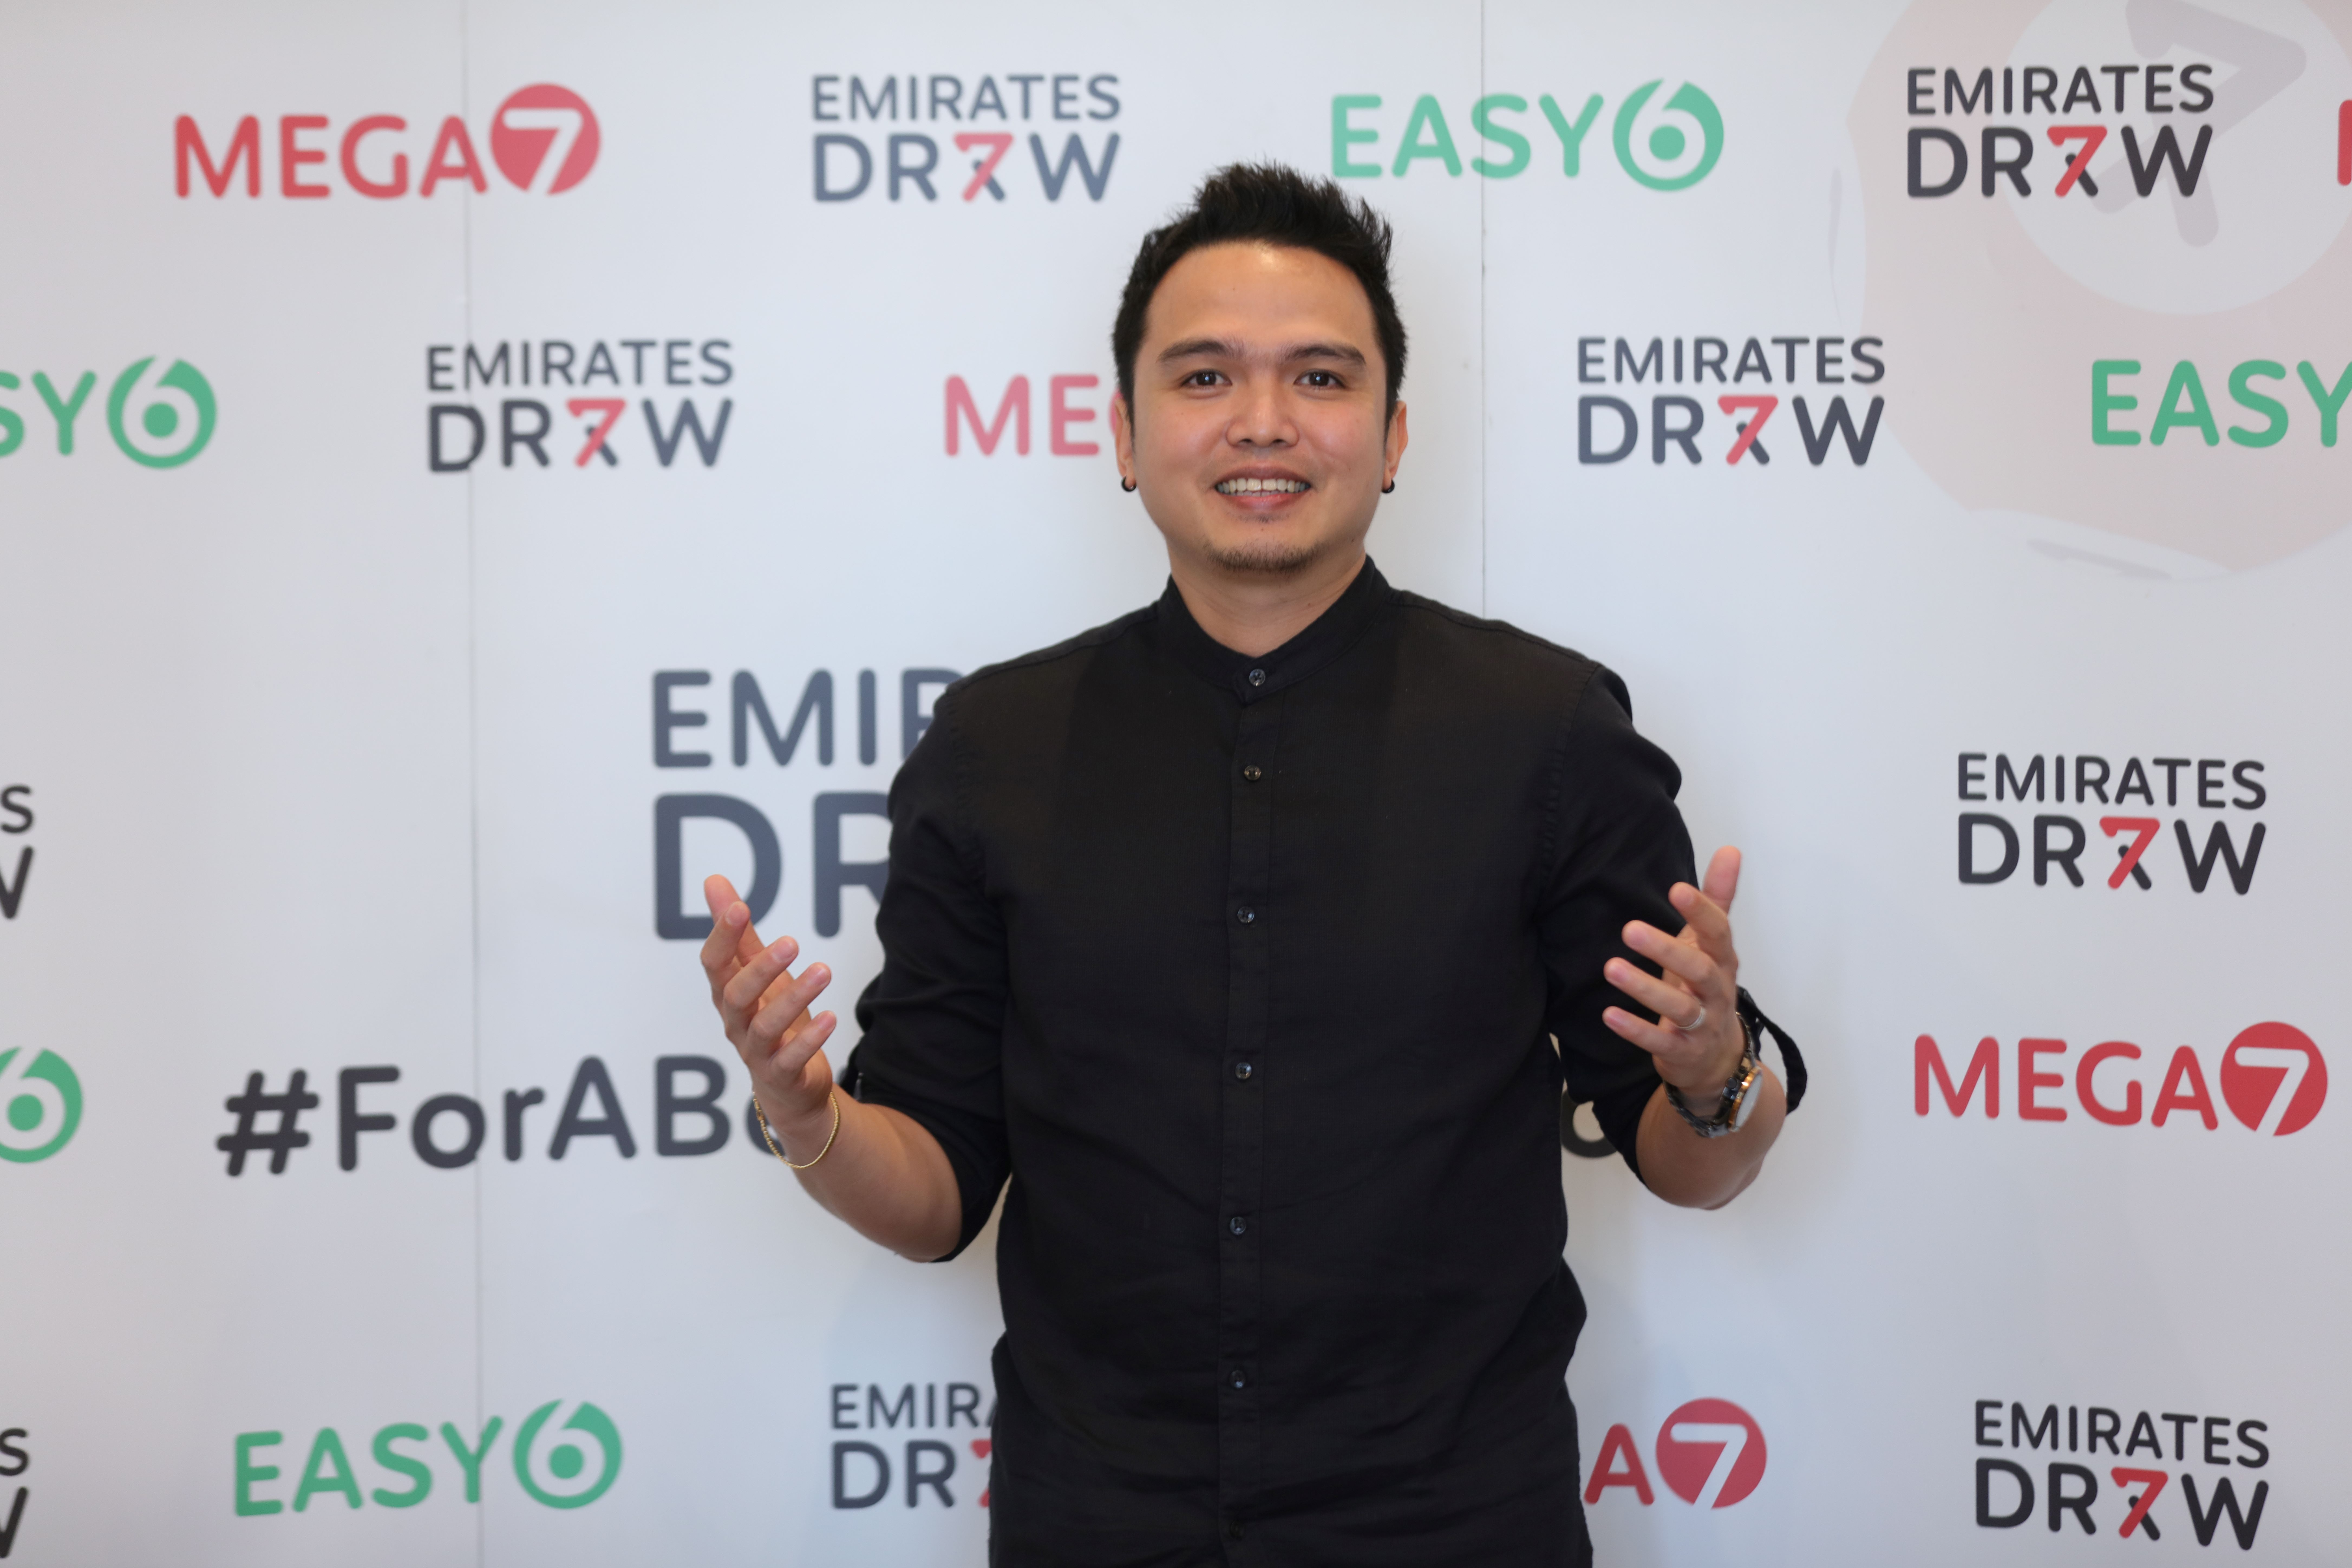 Friday the 13th turns lucky for Emirates Draw’s latest winner